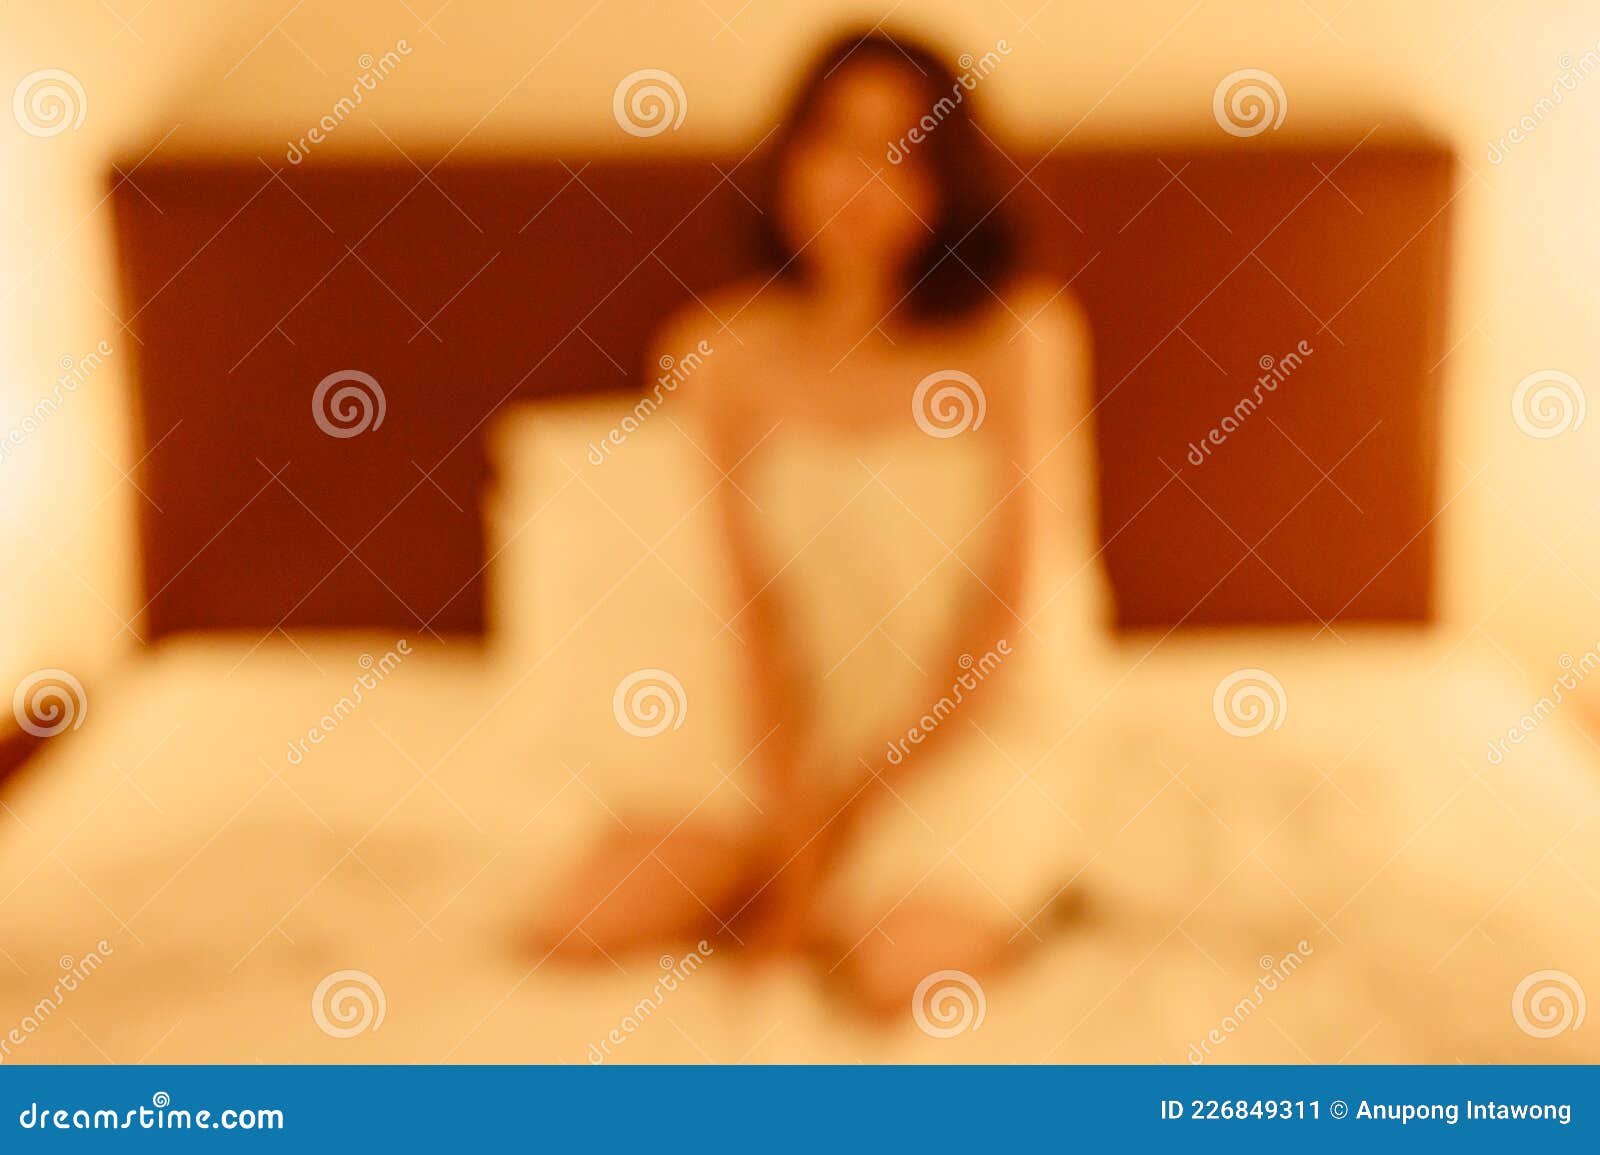 Abstract of Blurred Background Image of Prostitute Woman Waiting for Her Partner, Sitting on the Bed in Hotel